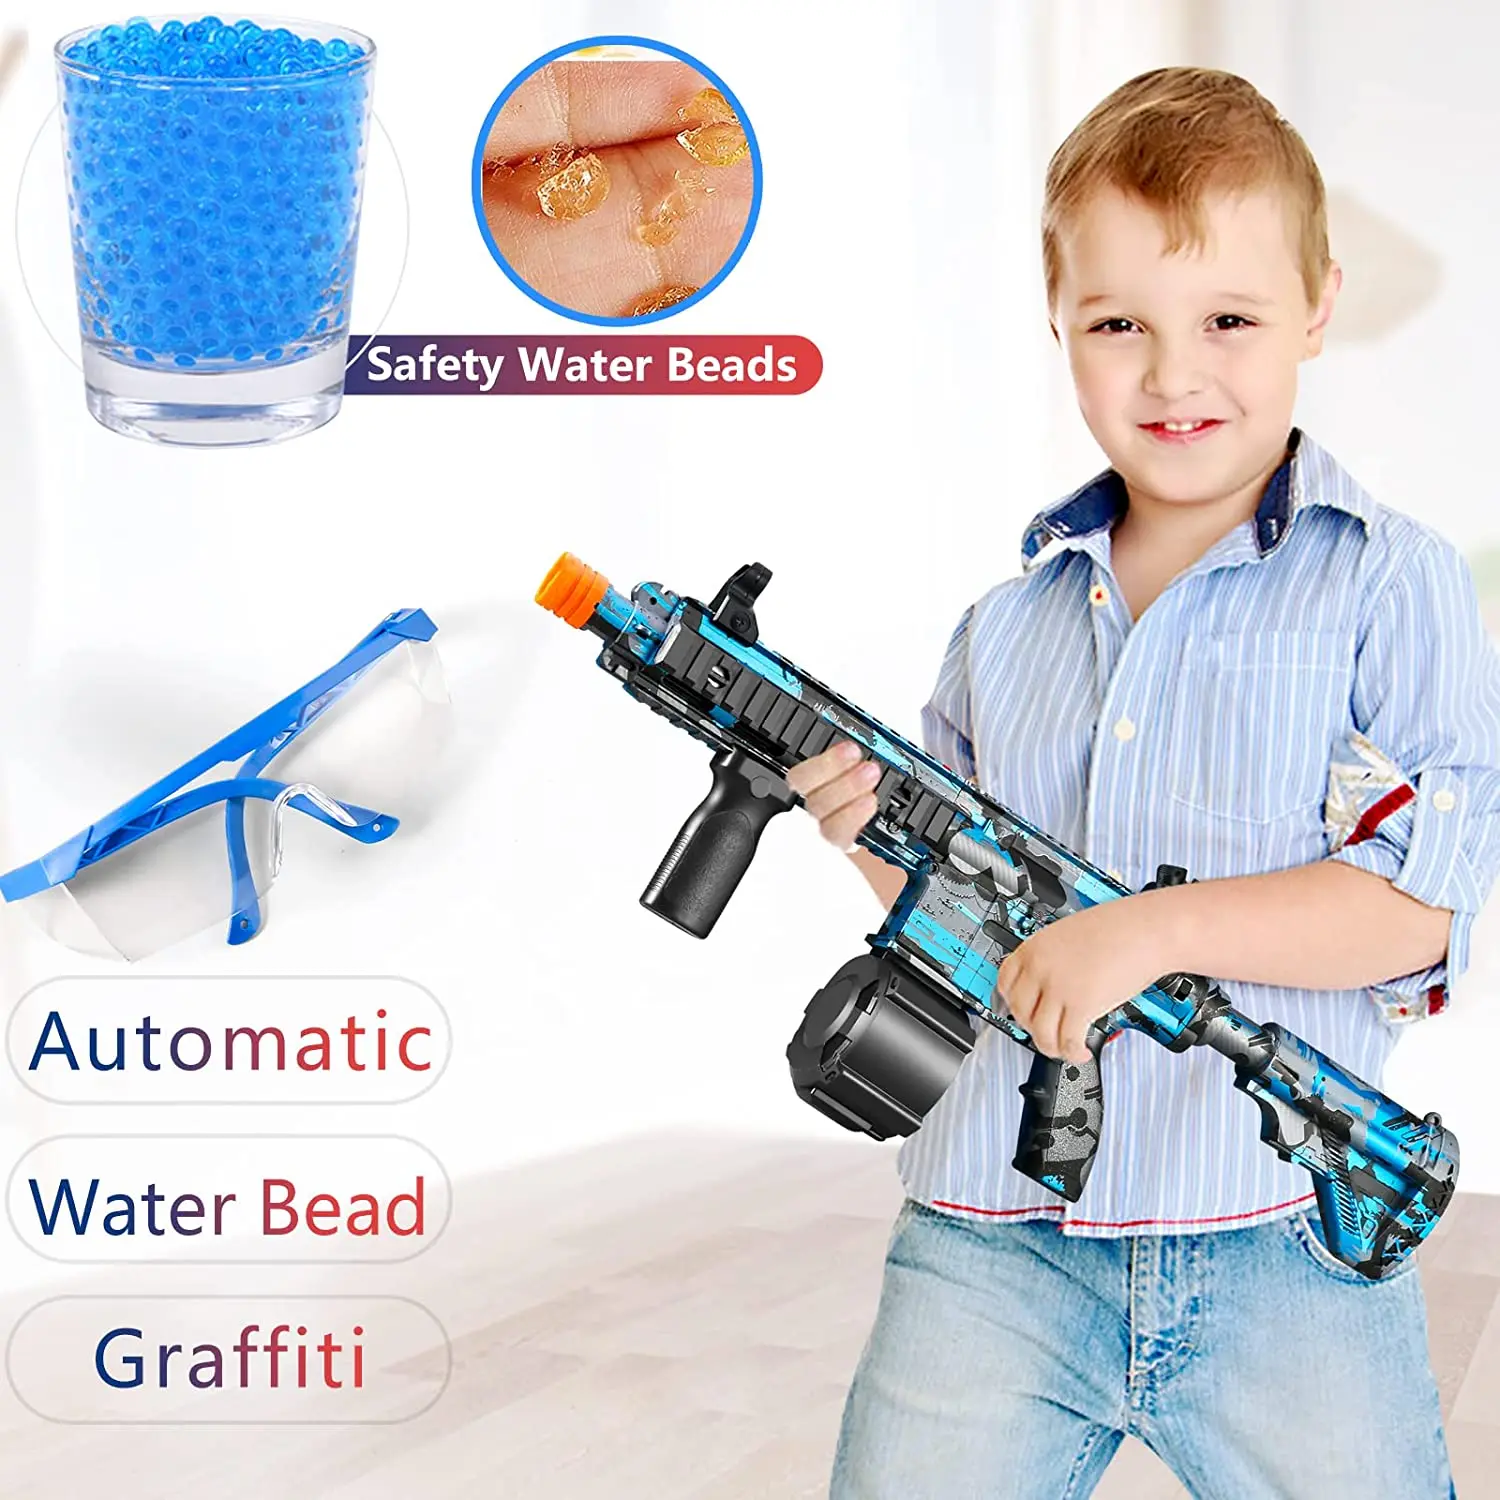 

2-in-1 Outdoor Toys M416 Manual & Electric Splatter Shooting Gun Gel Ball Blaster With 10000 Eco-Friendly Water Beads Goggles